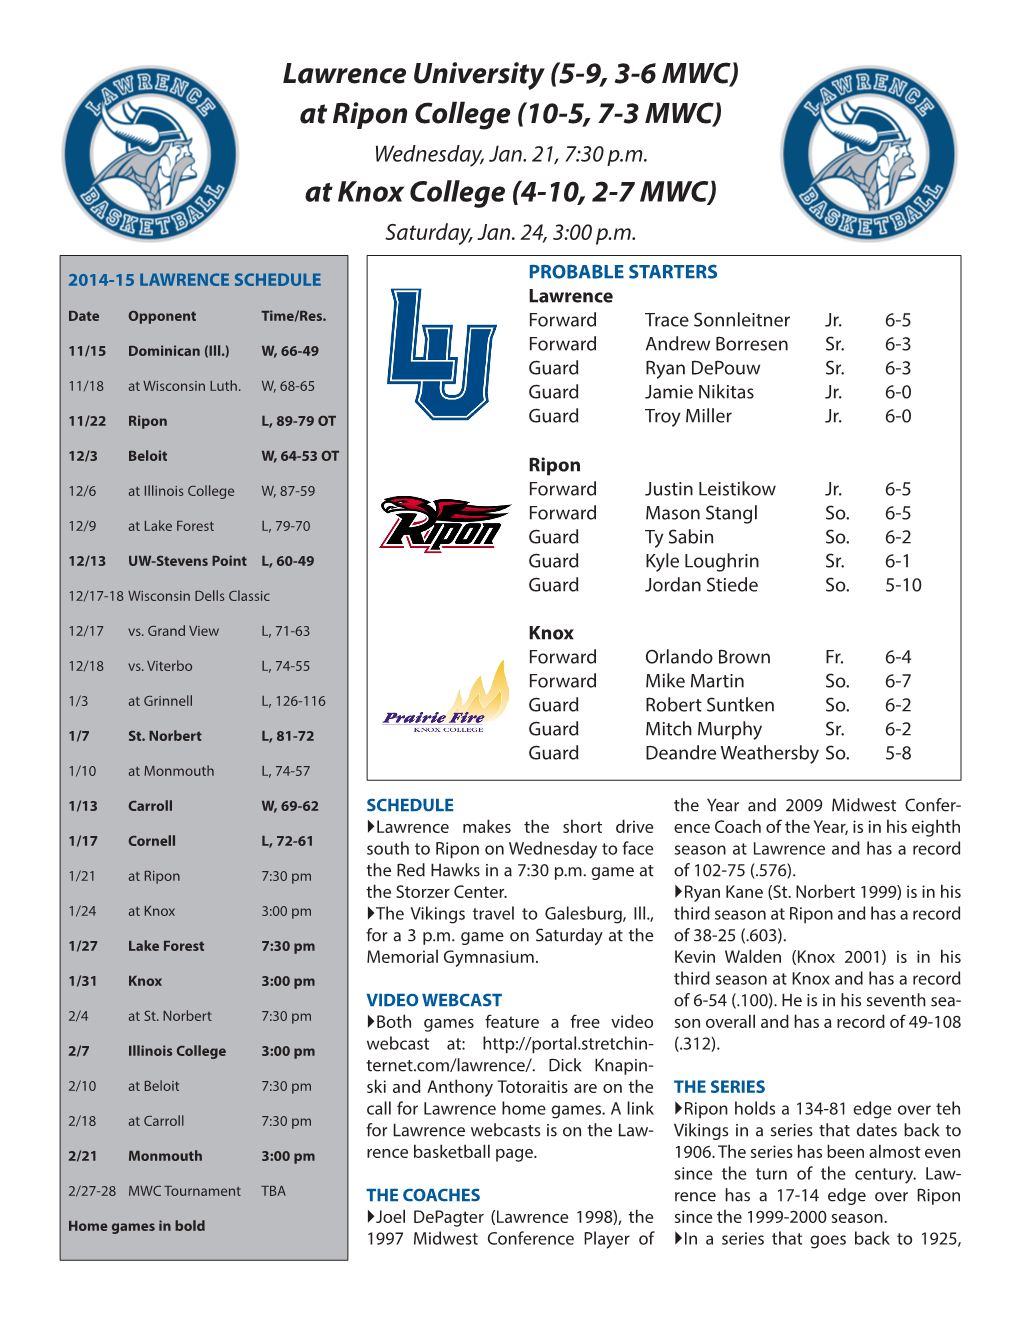 Lawrence University (5-9, 3-6 MWC) at Ripon College (10-5, 7-3 MWC) Wednesday, Jan